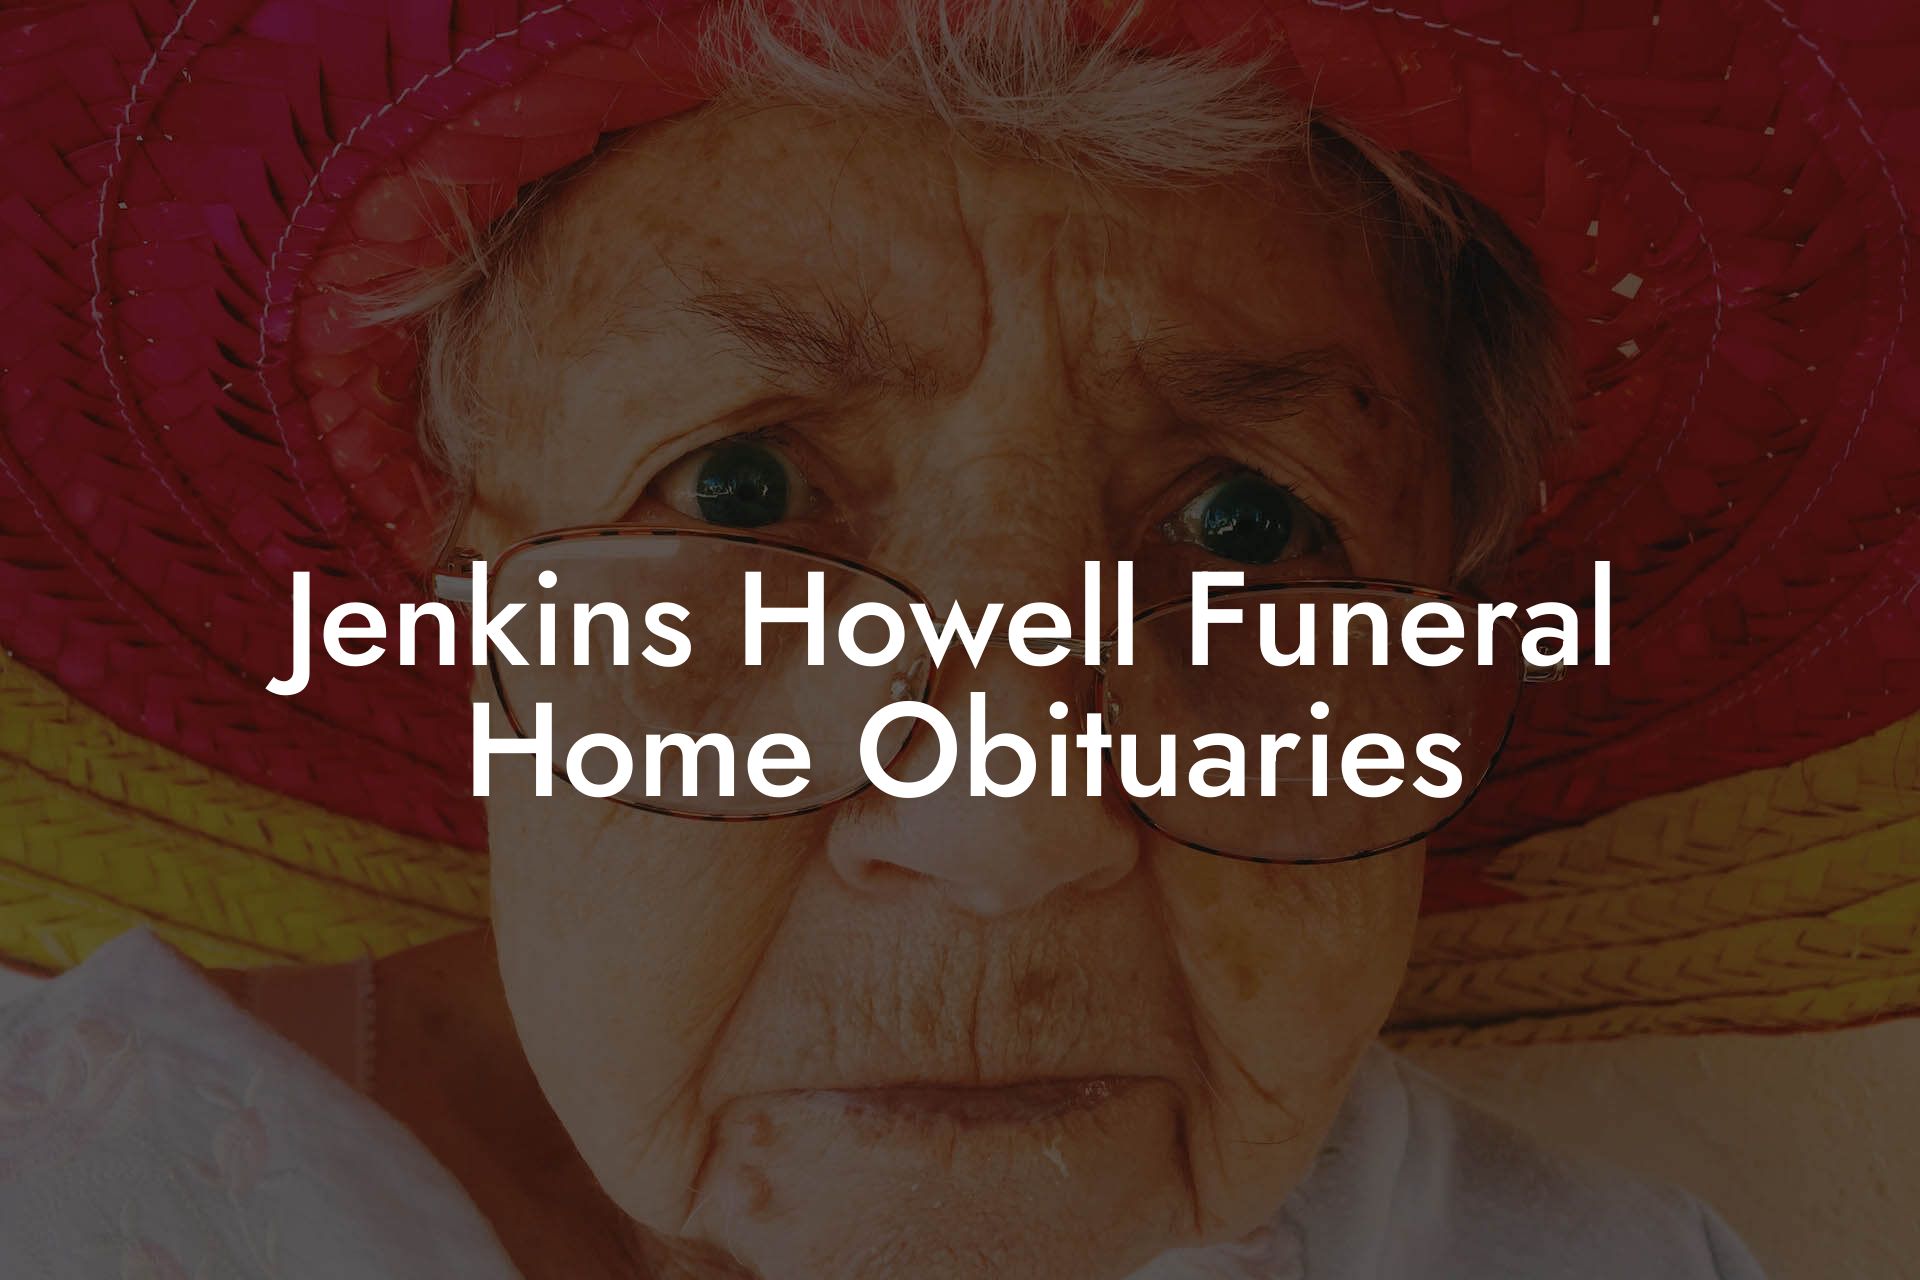 Jenkins Howell Funeral Home Obituaries